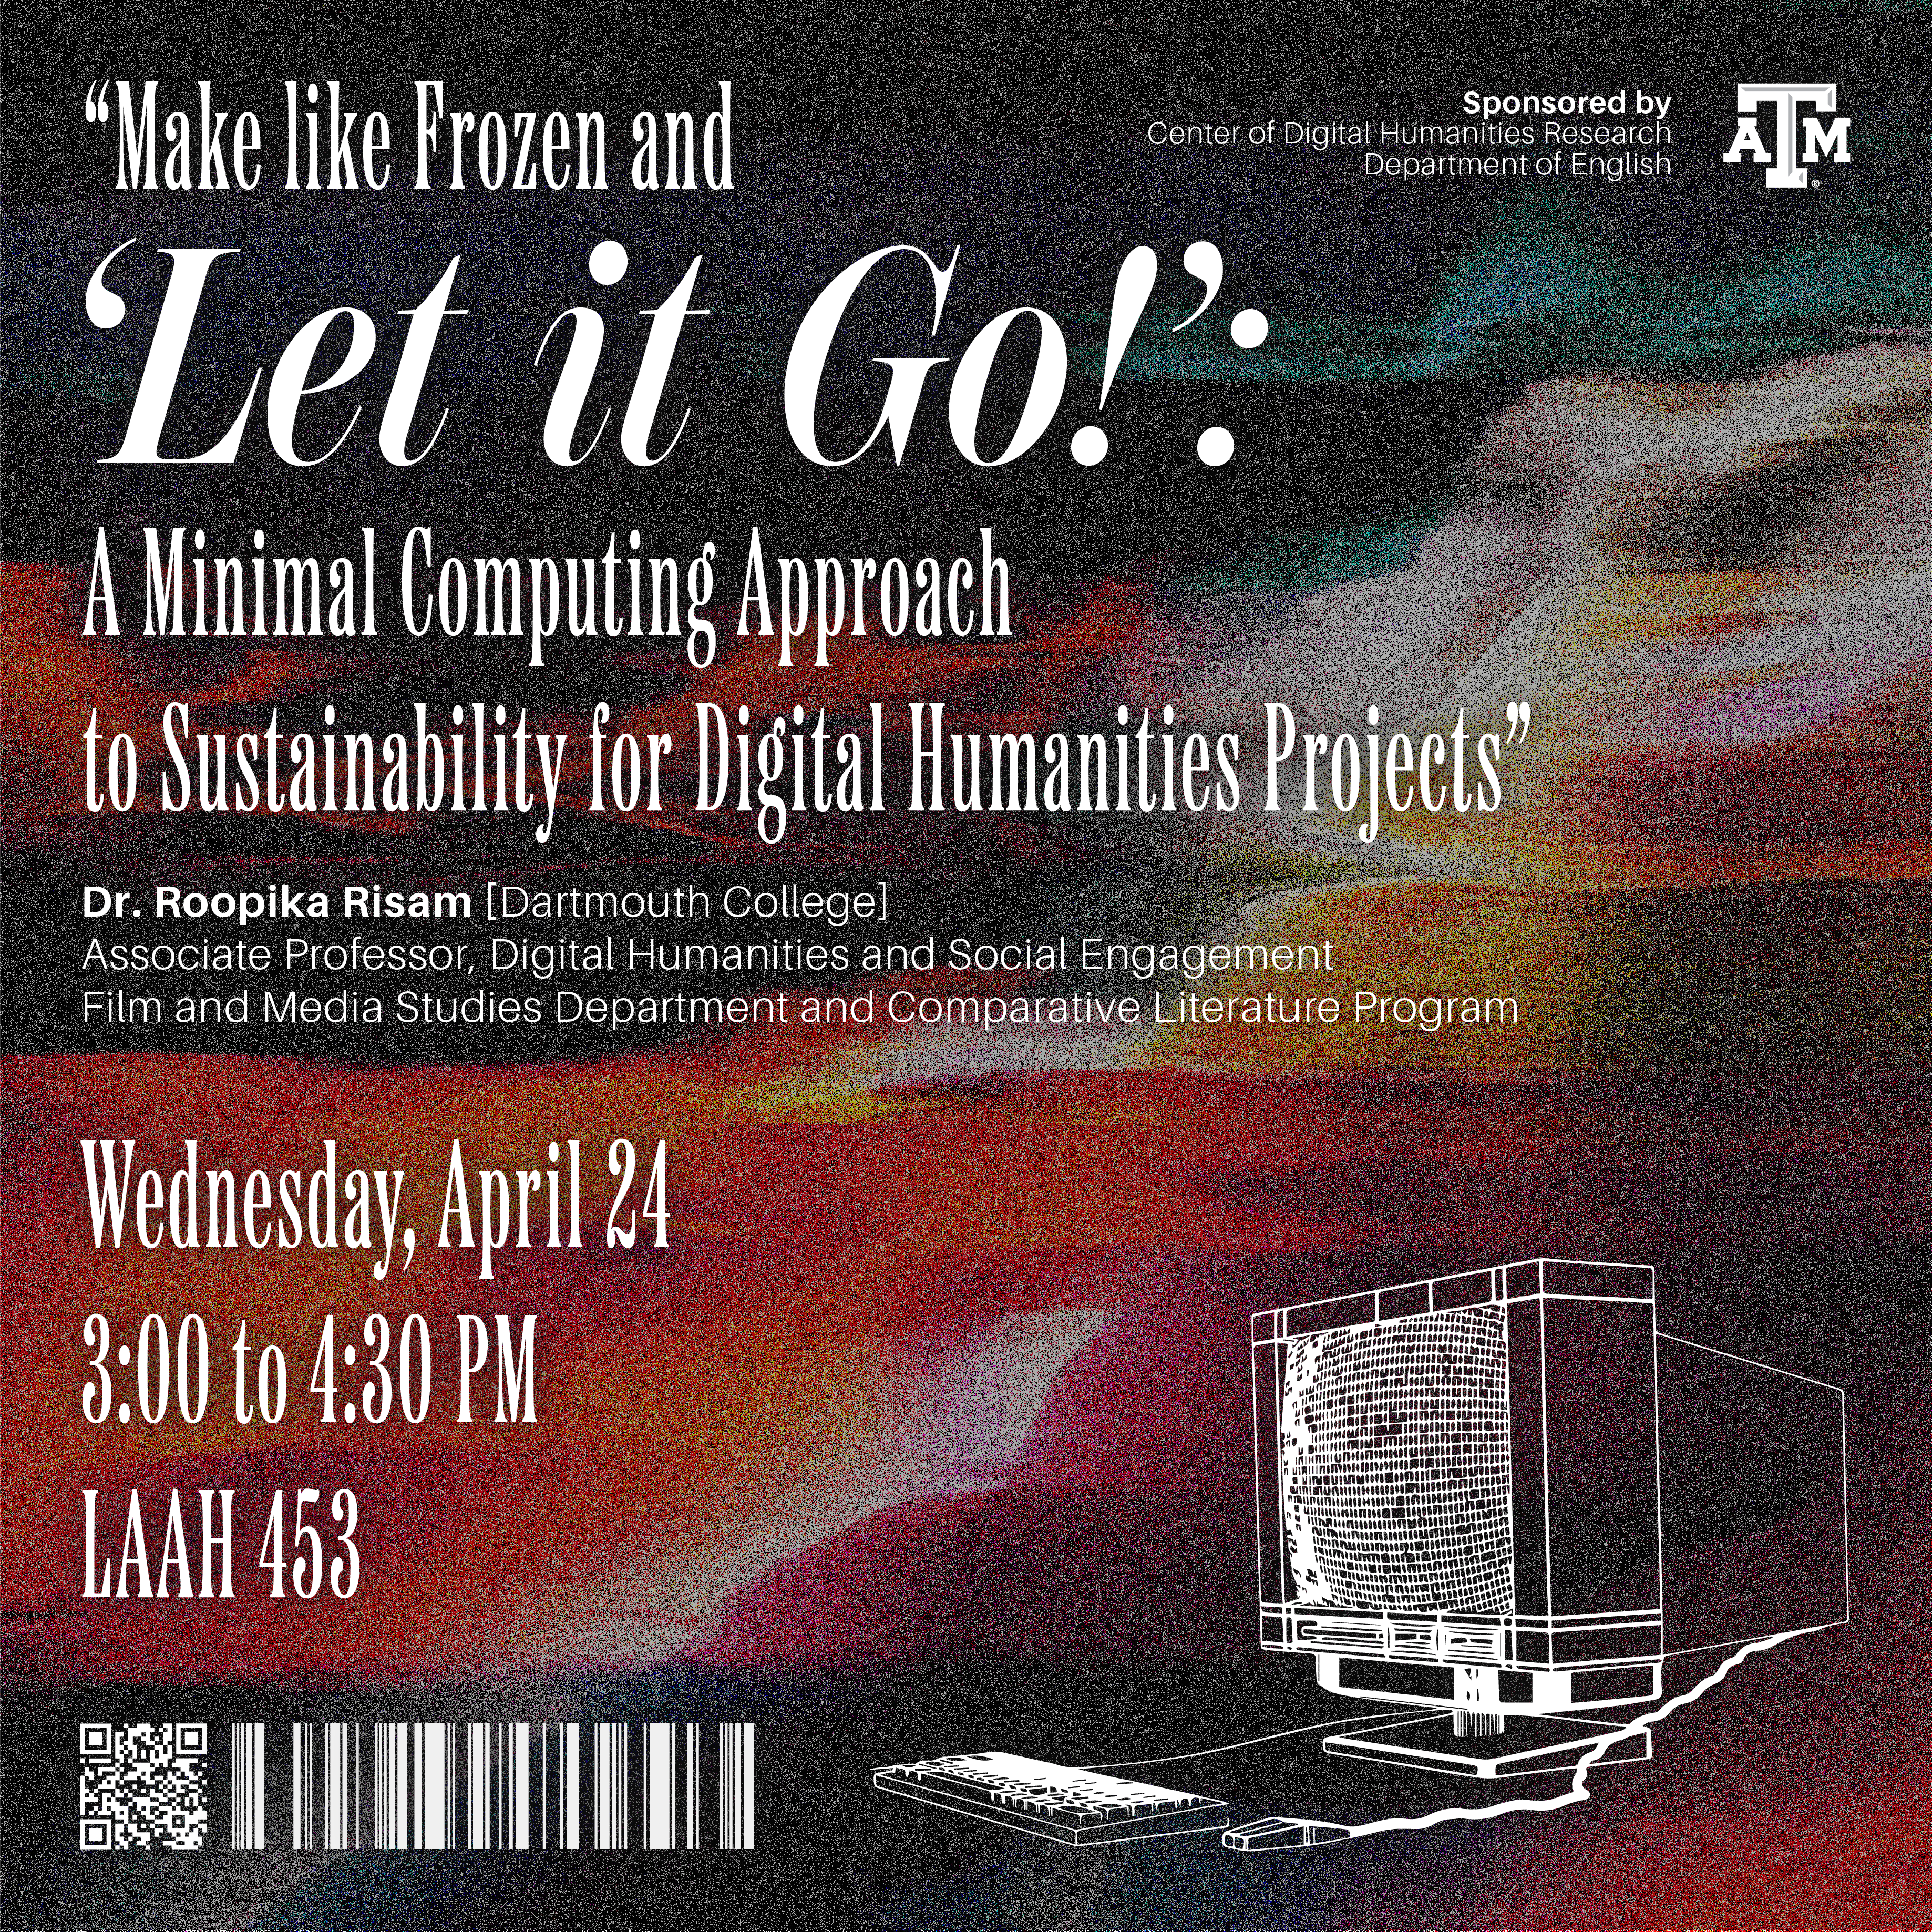 Flyer for Dr. Risam's lecture "Make Like Frozen and 'Let It Go!': A Minimal Computing Approach to Sustainability for Digital Humanities Projects".